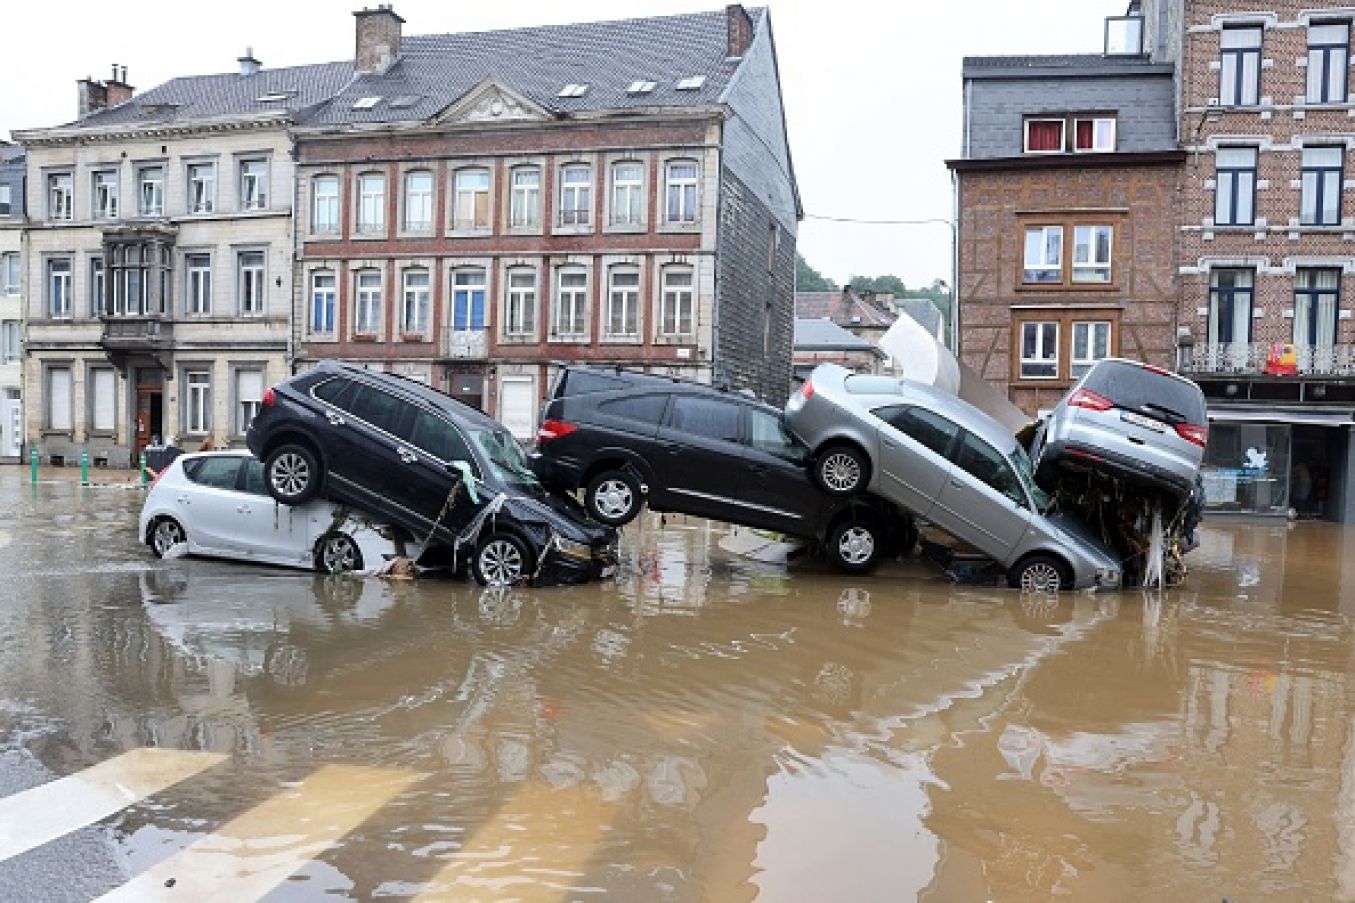 Cars Piled Up In The Belgian City Of Verviers, After Heavy Rains And Floods Lashed Western Europe. Photo: François Walschaerts/Afp Via Getty Images